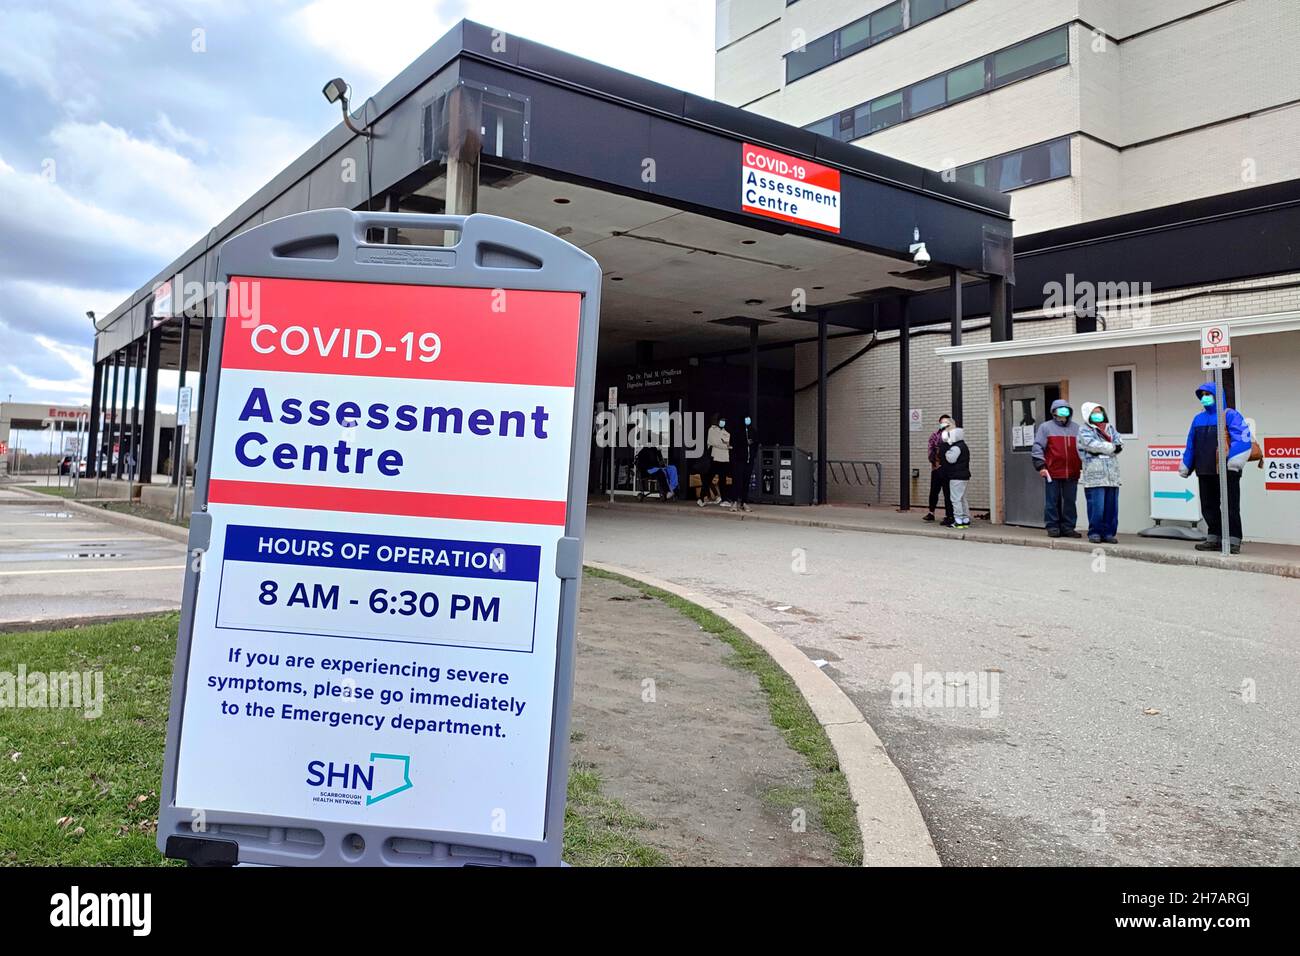 Toronto, Ontario, Canada - 11/18/2021: Sign to show direction to the Covid-19 Assessment Centre Stock Photo